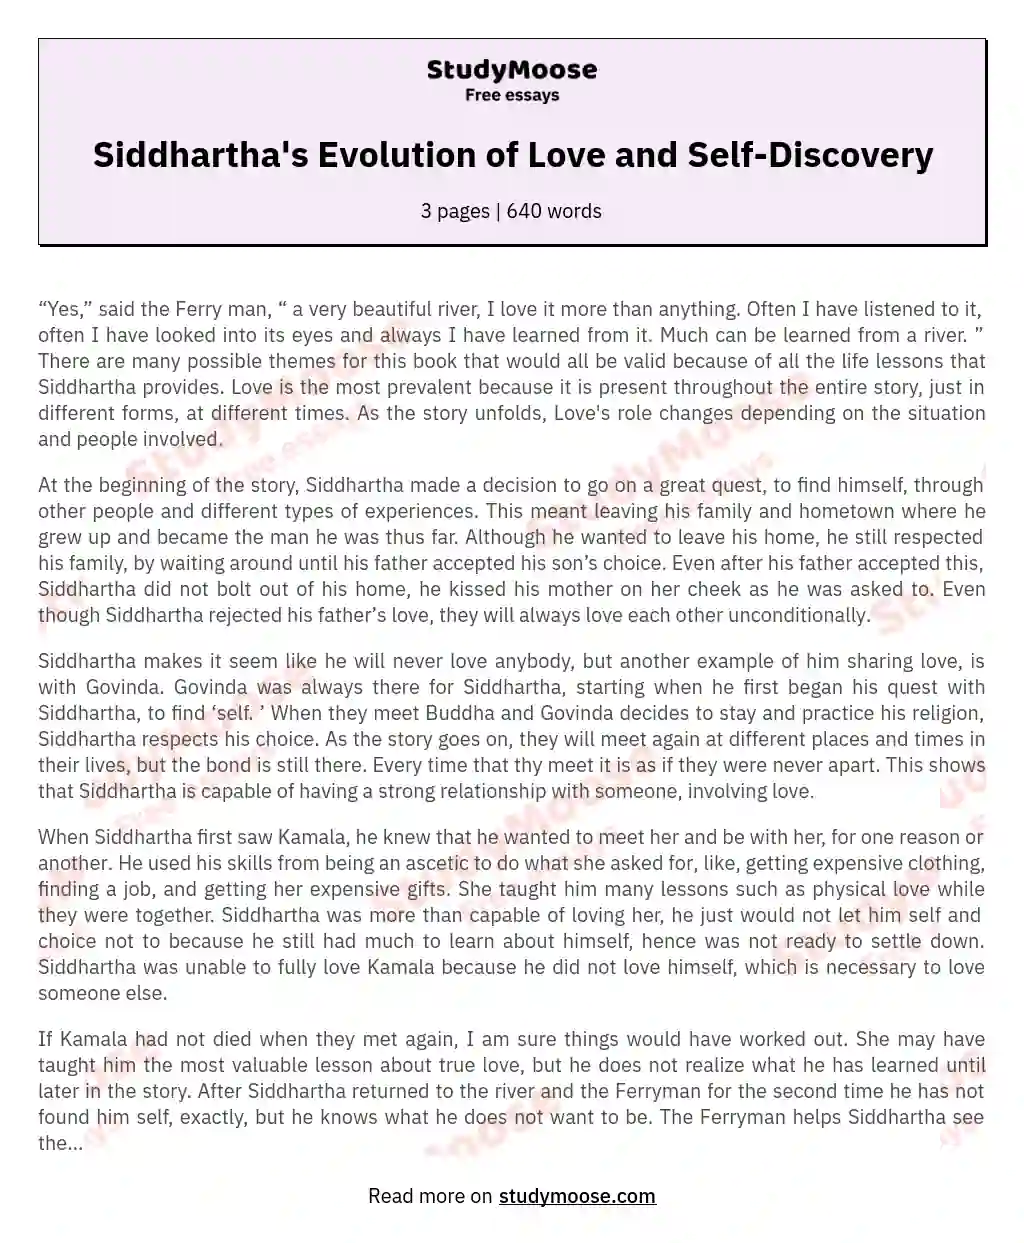 Siddhartha's Evolution of Love and Self-Discovery essay